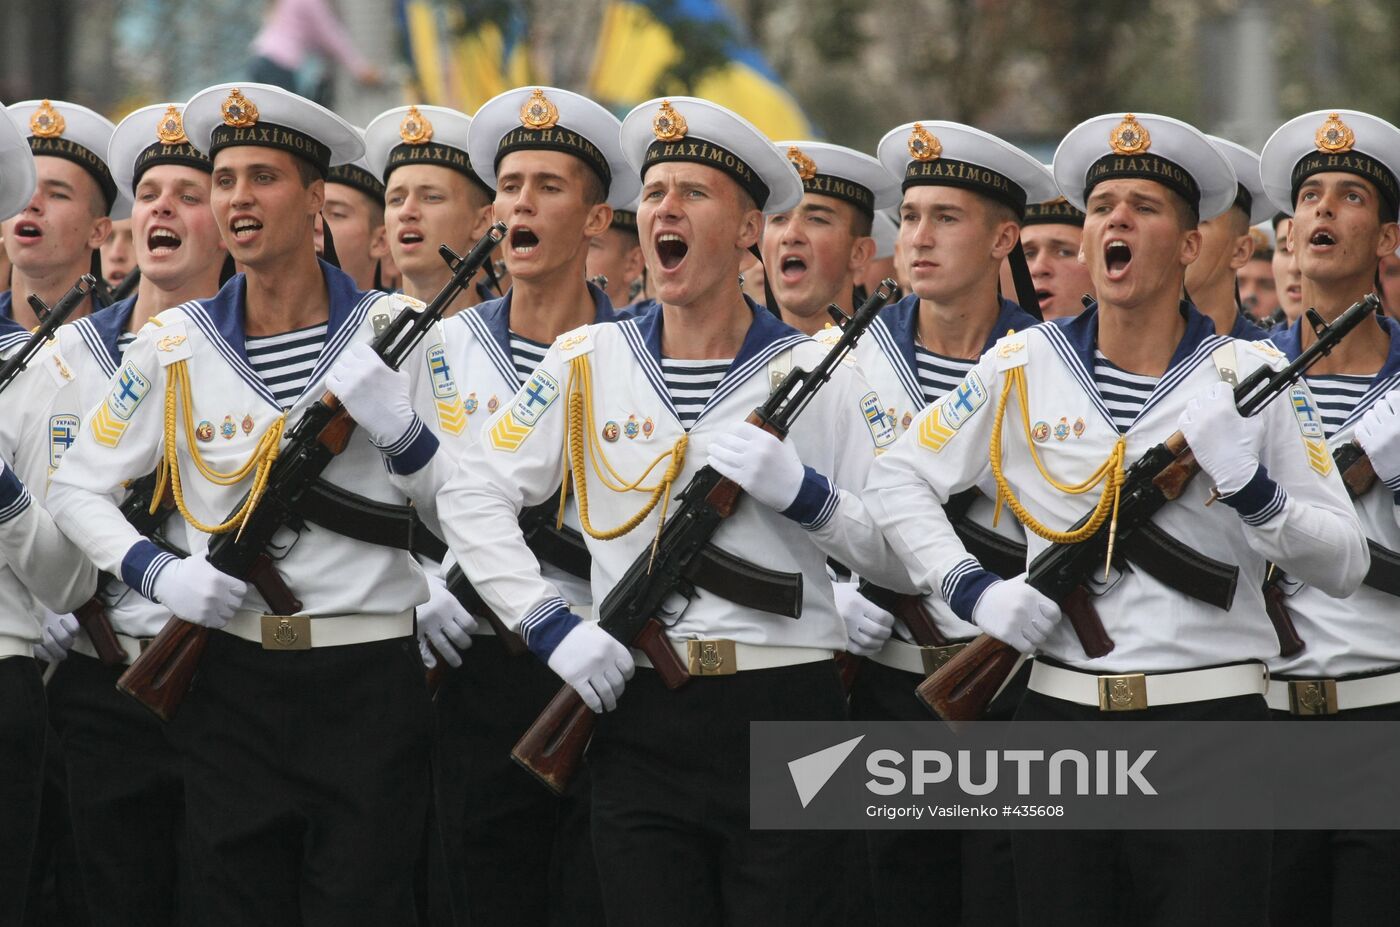 Military parade in honor of Ukraine's independence in Kiev